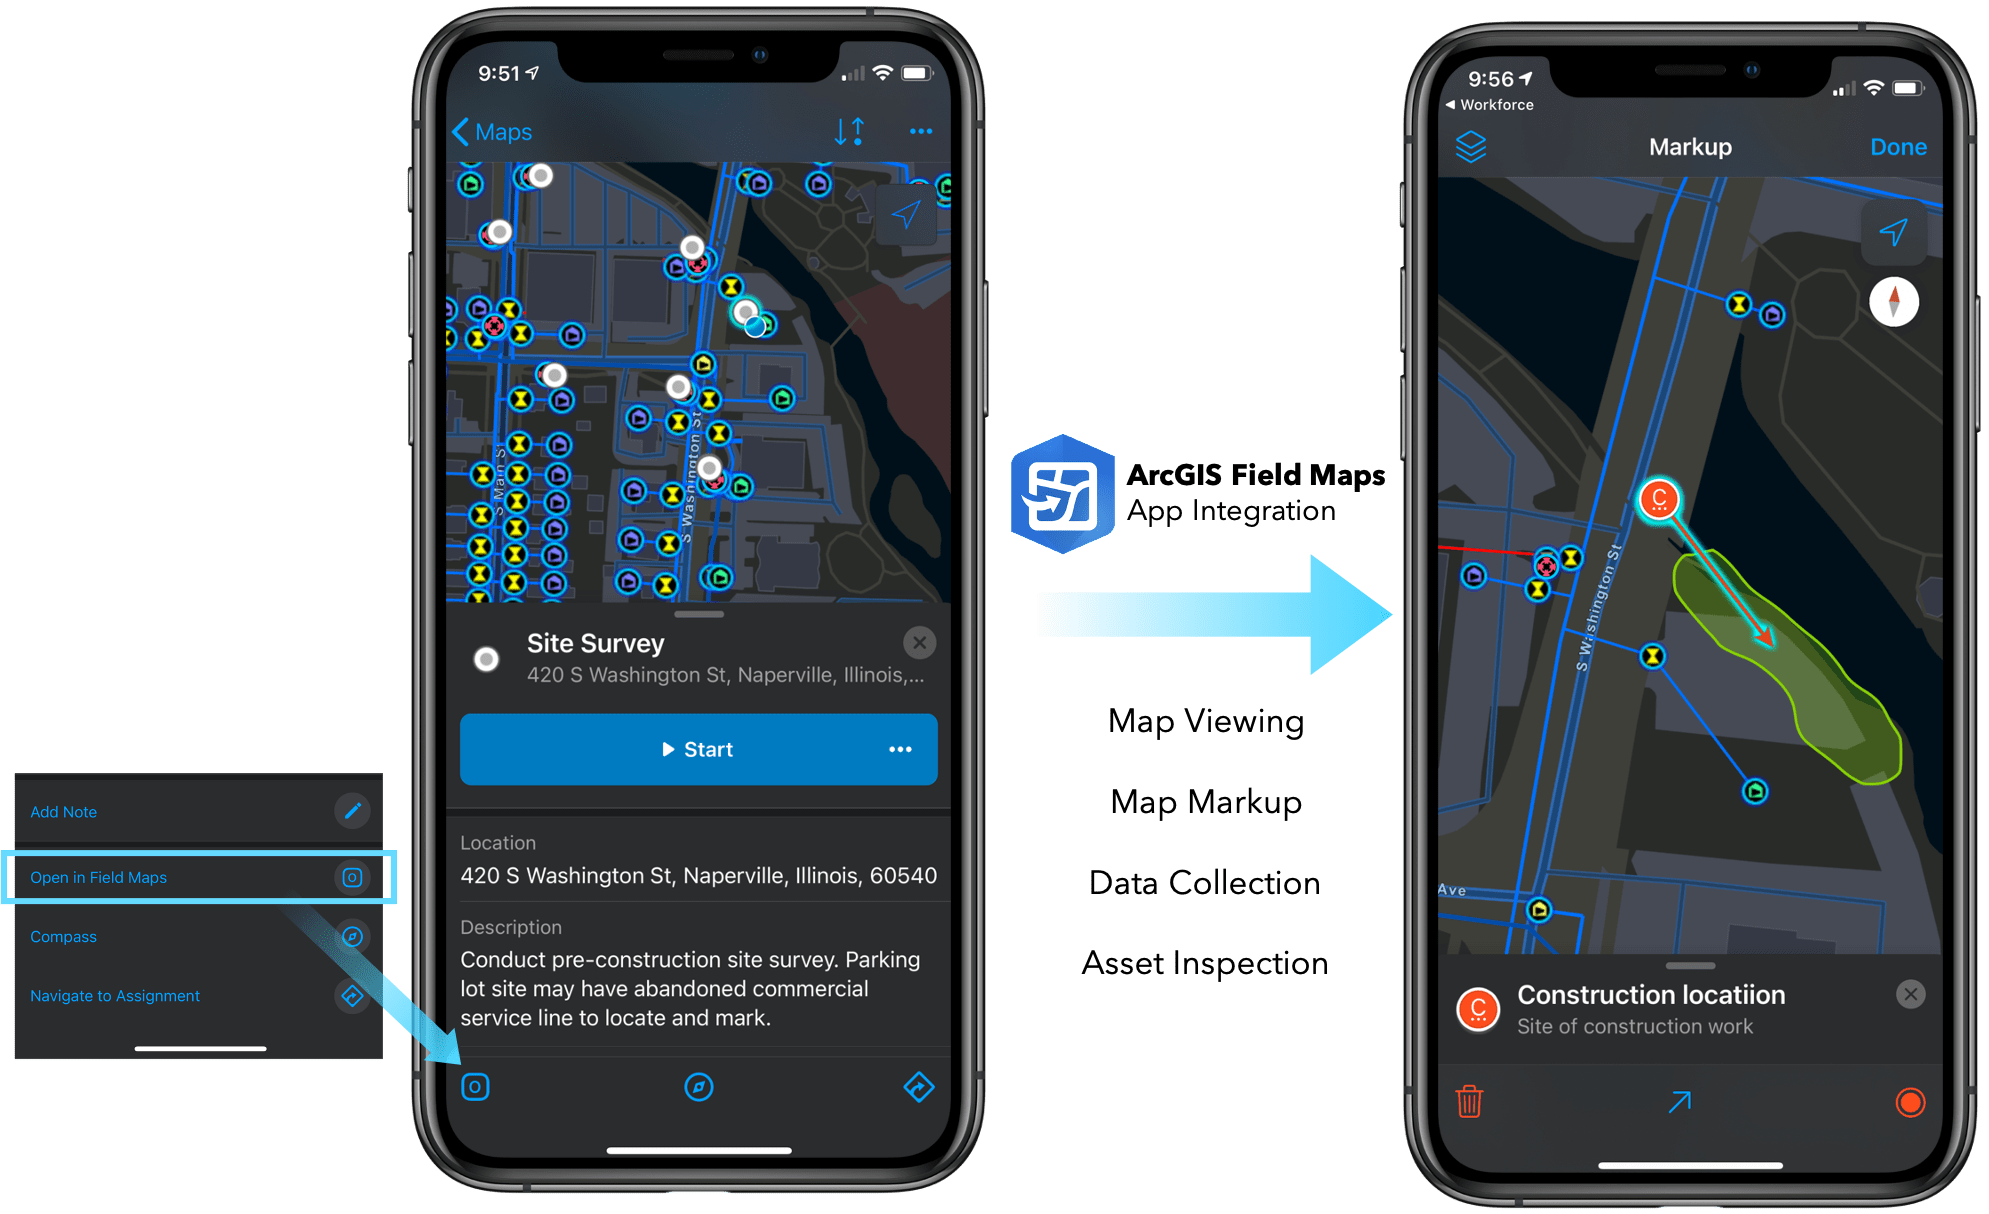 Field Maps integration on the mobile device